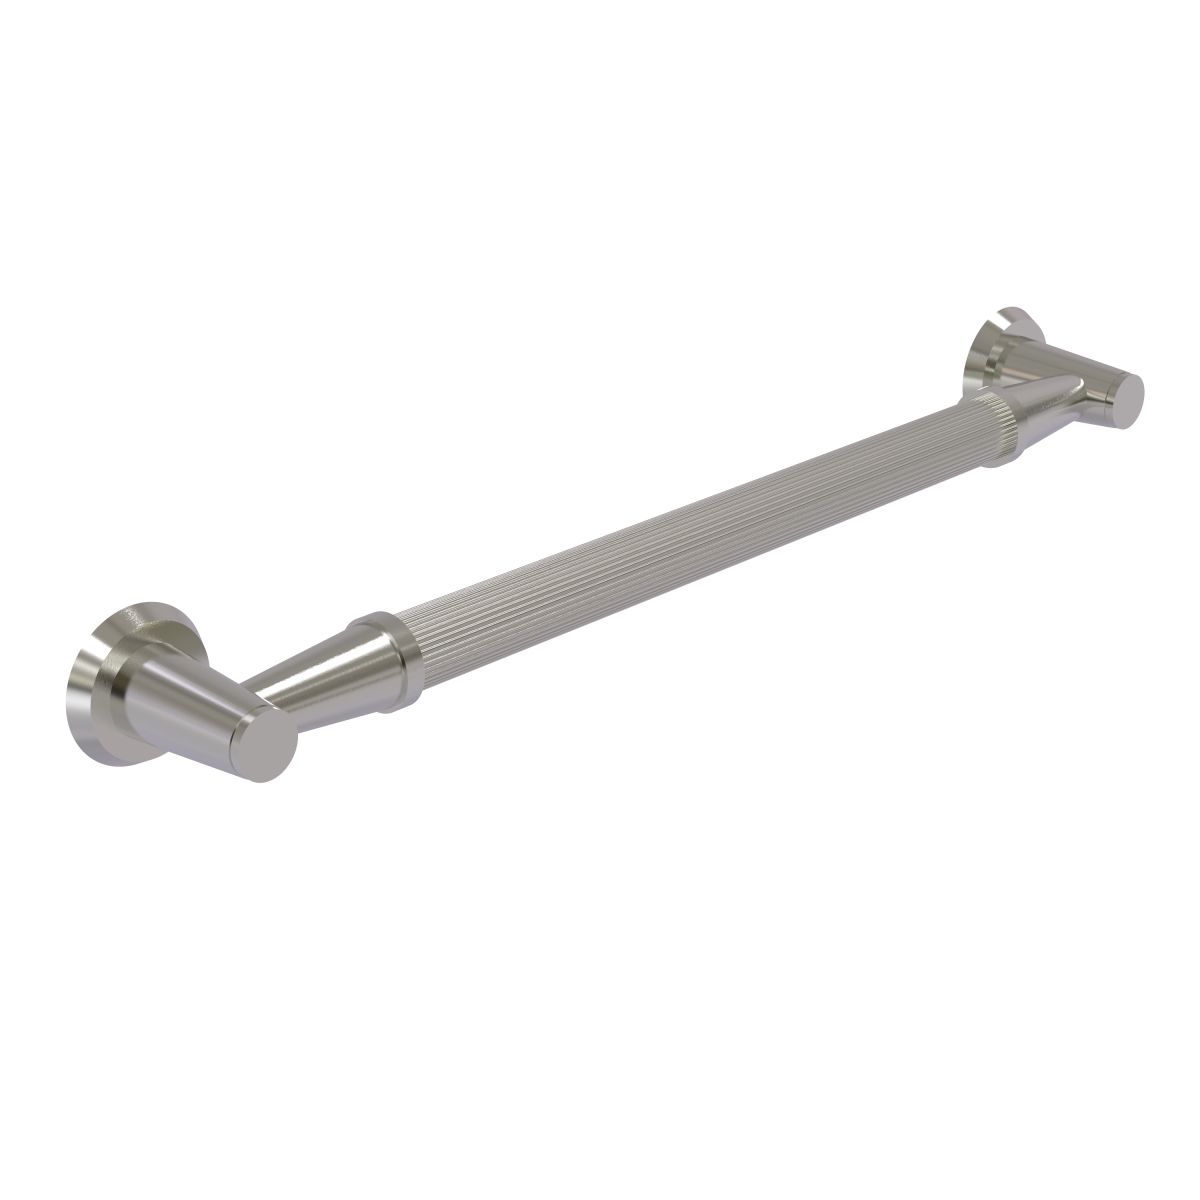 Picture of Allied Brass MD-GRR-24-SN 24 in. Reeded Grab Bar, Satin Nickel - 3.5 x 26 x 24 in.